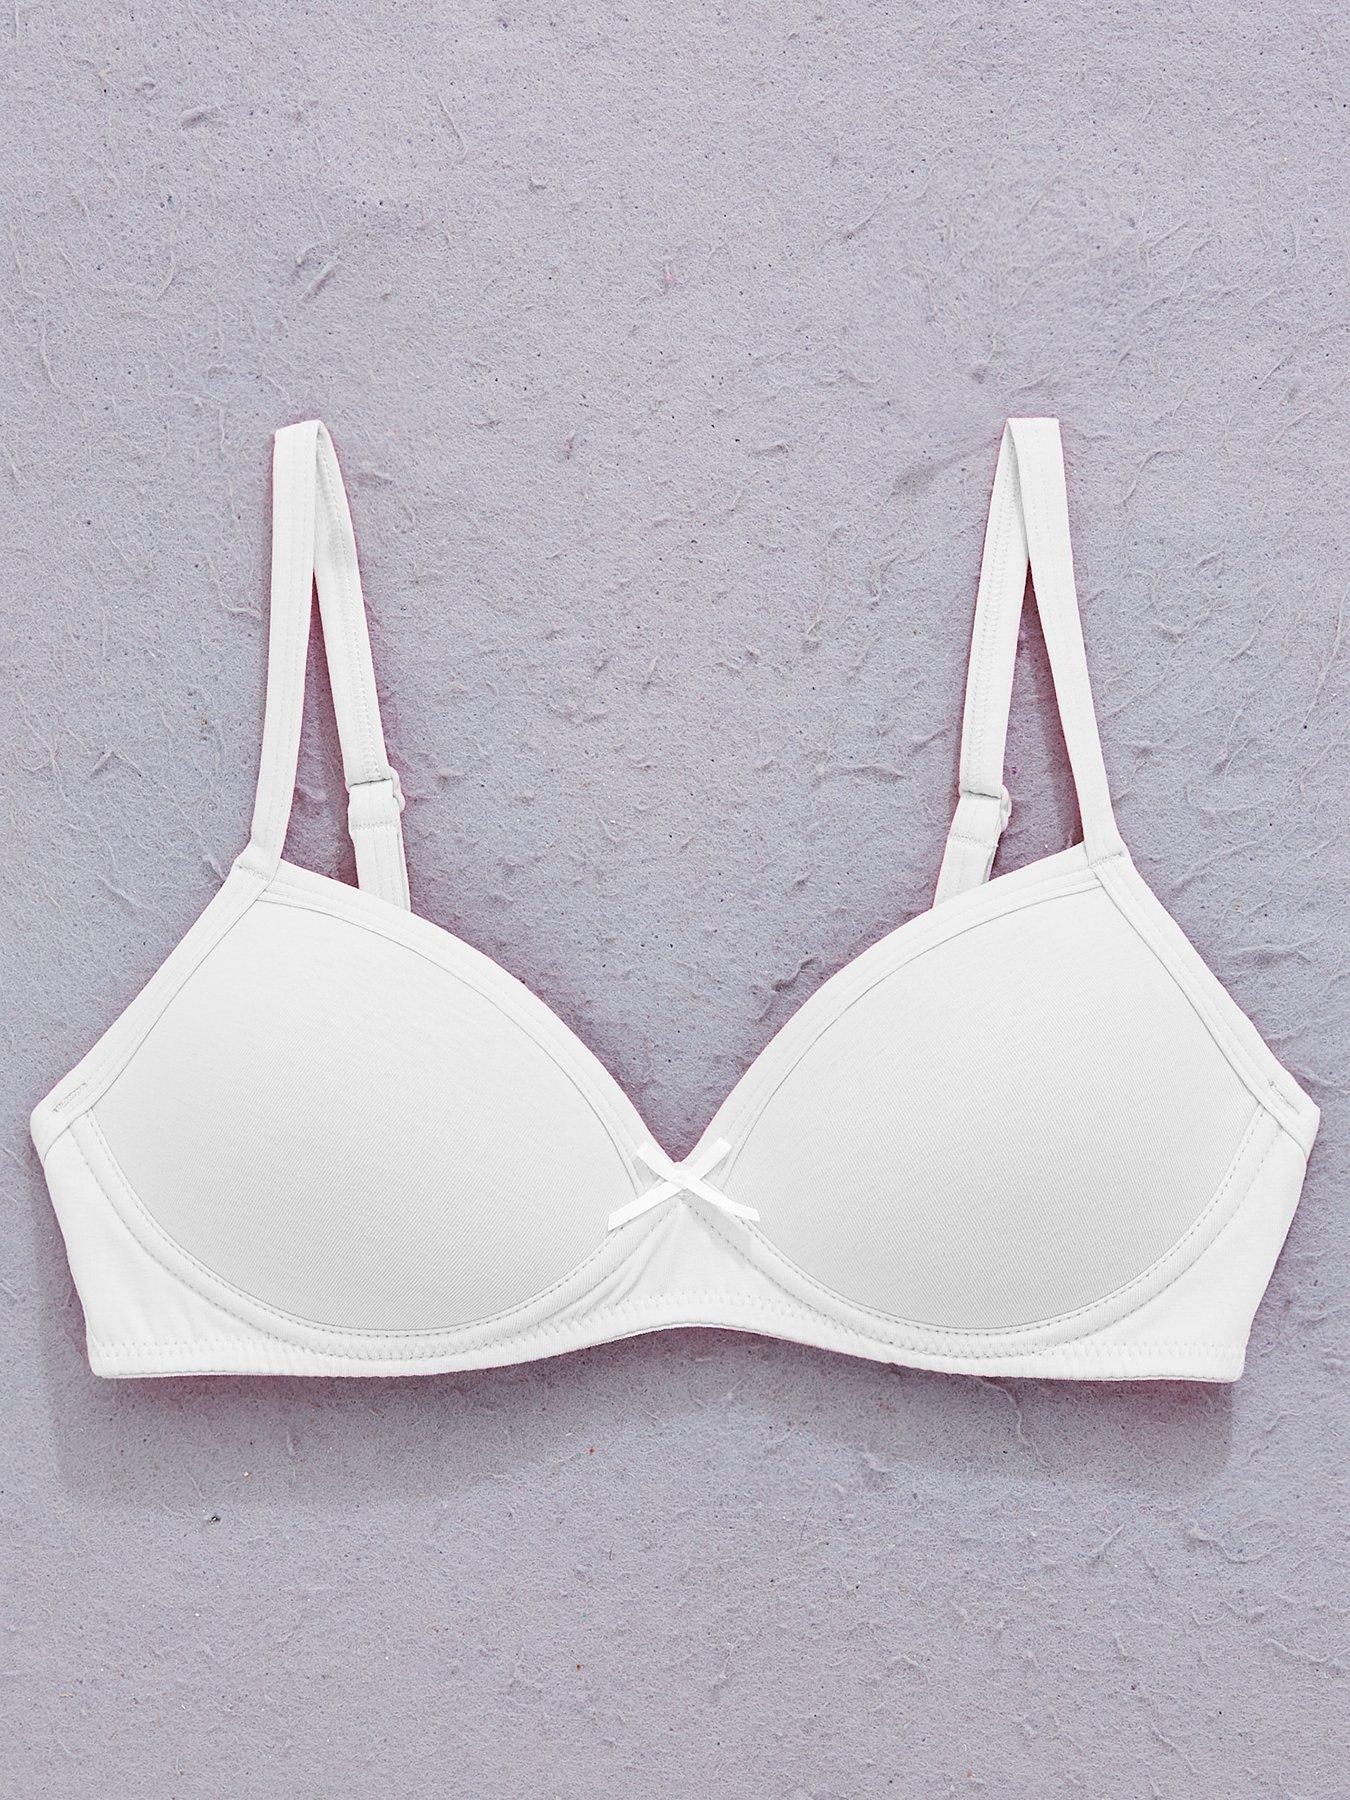 Buy White First Bra 2 Pack Size 32AA Bra, Underwear, socks and tights